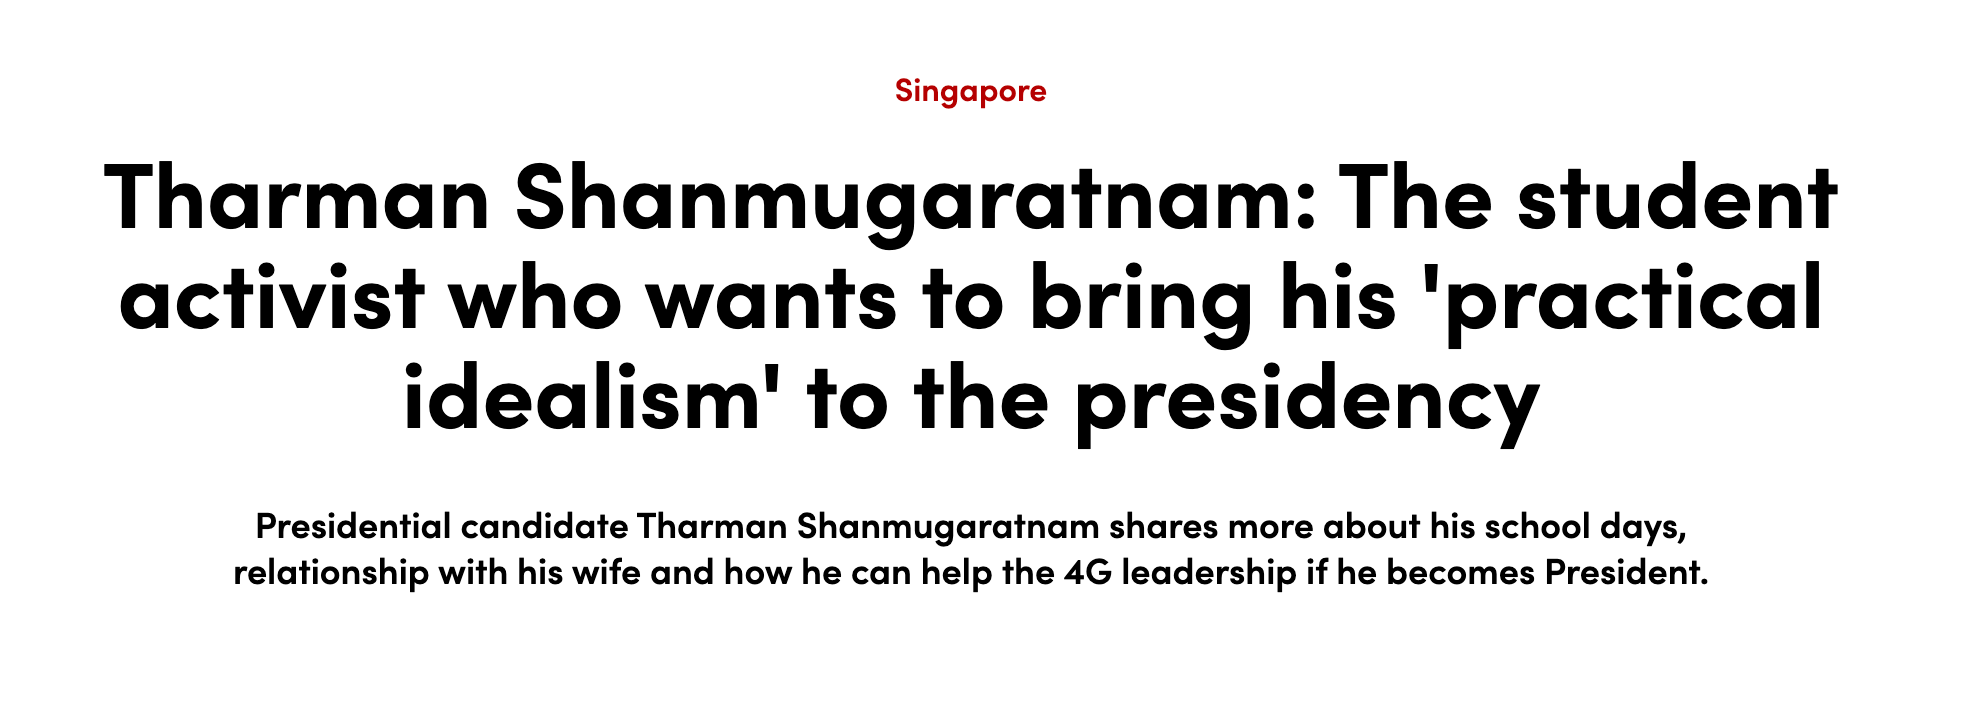 The headline from a CNA article on Tharman and his campaign.